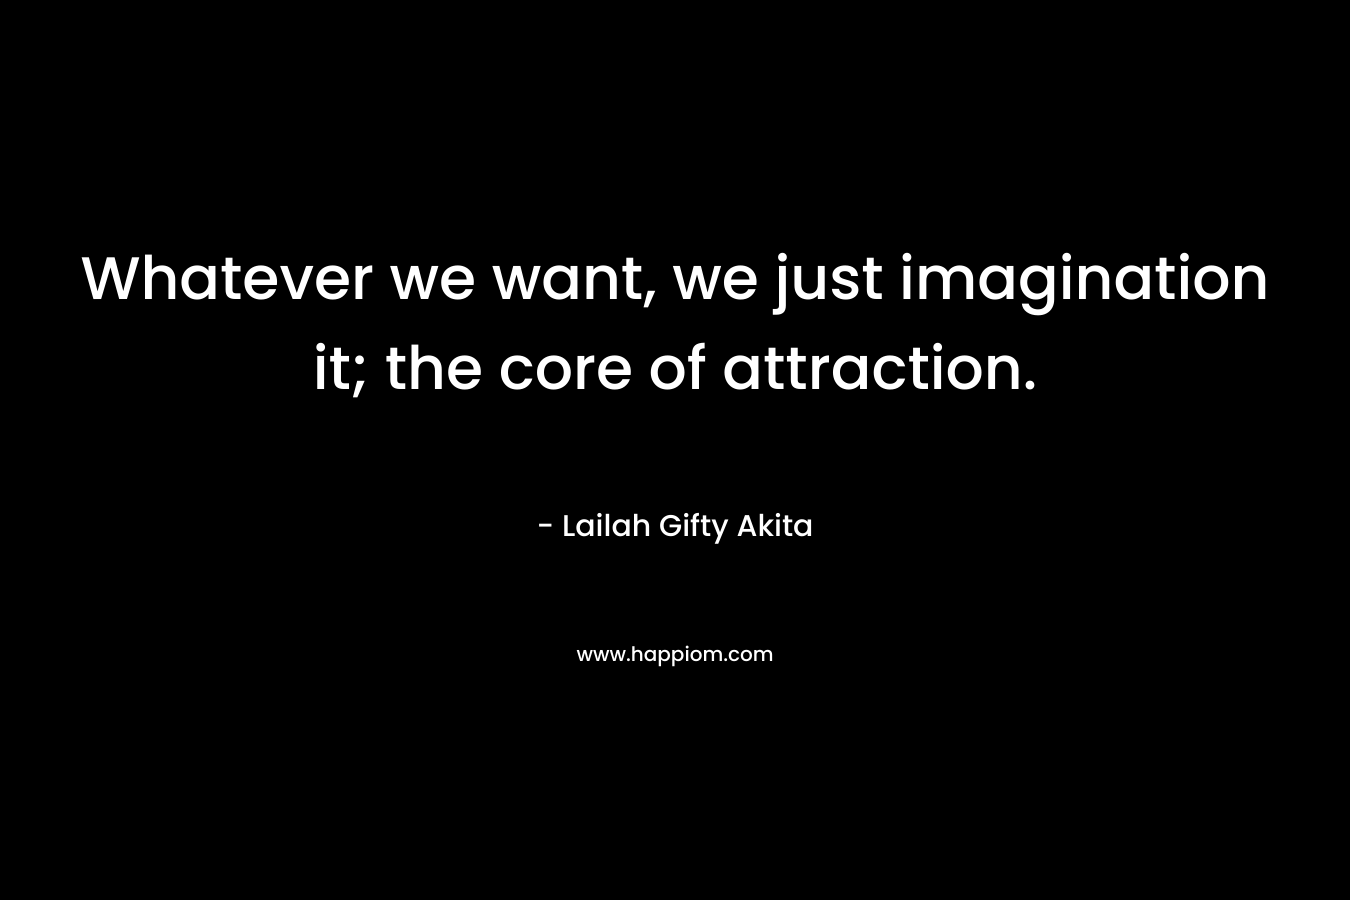 Whatever we want, we just imagination it; the core of attraction.